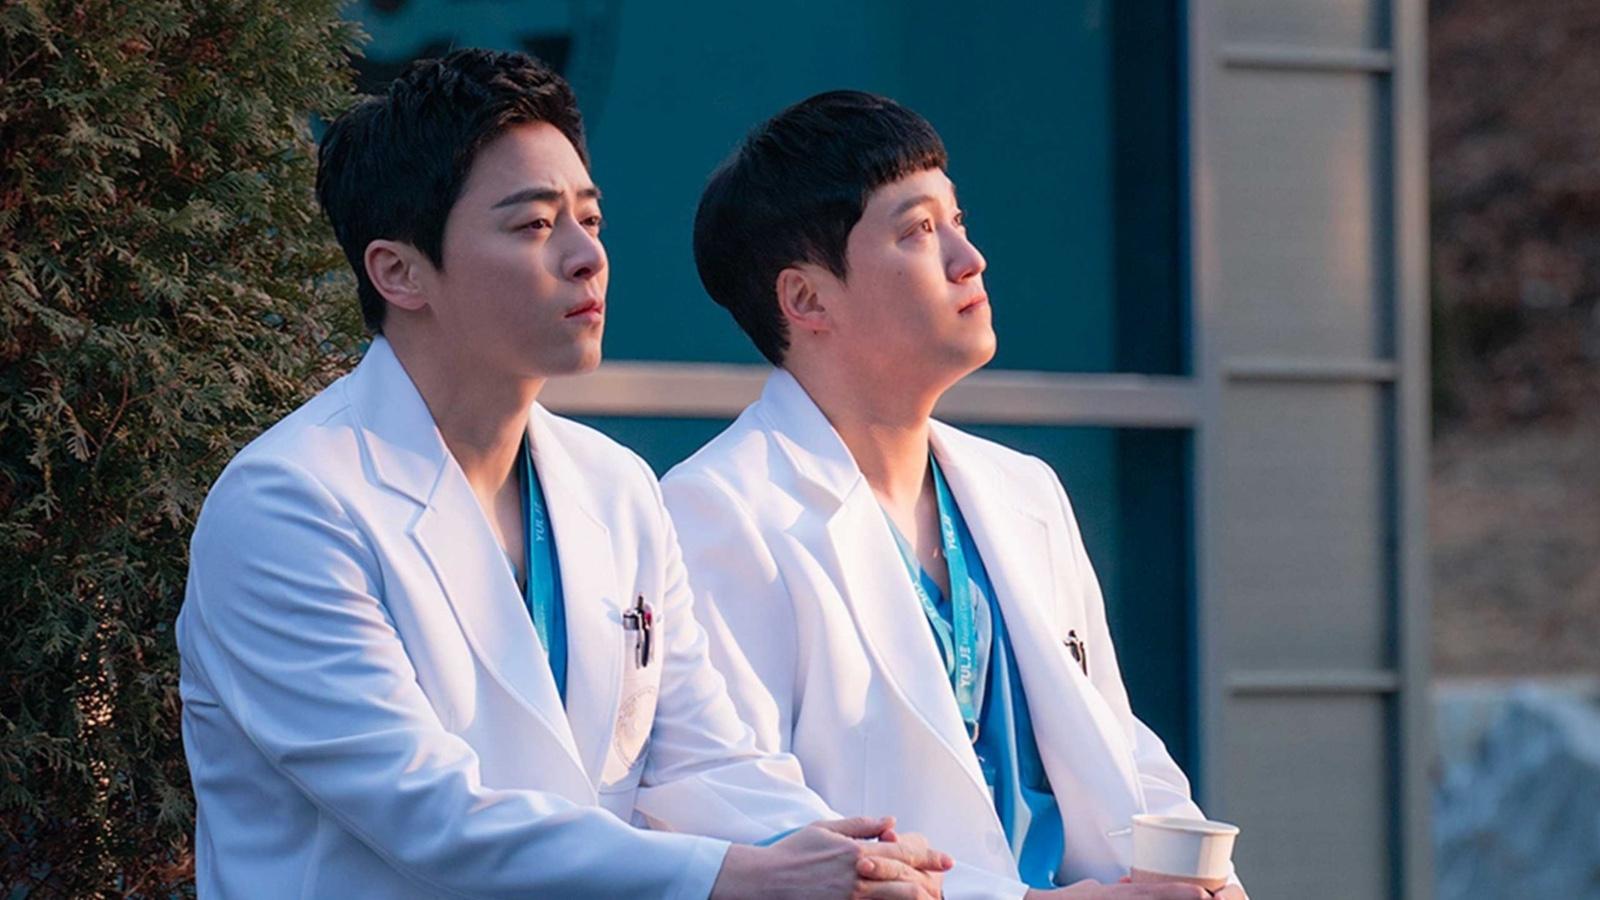 Jo Jung-suk and Kim Dae-myung in Hospital Playlist as Ik-jun and Seok-hyeong.